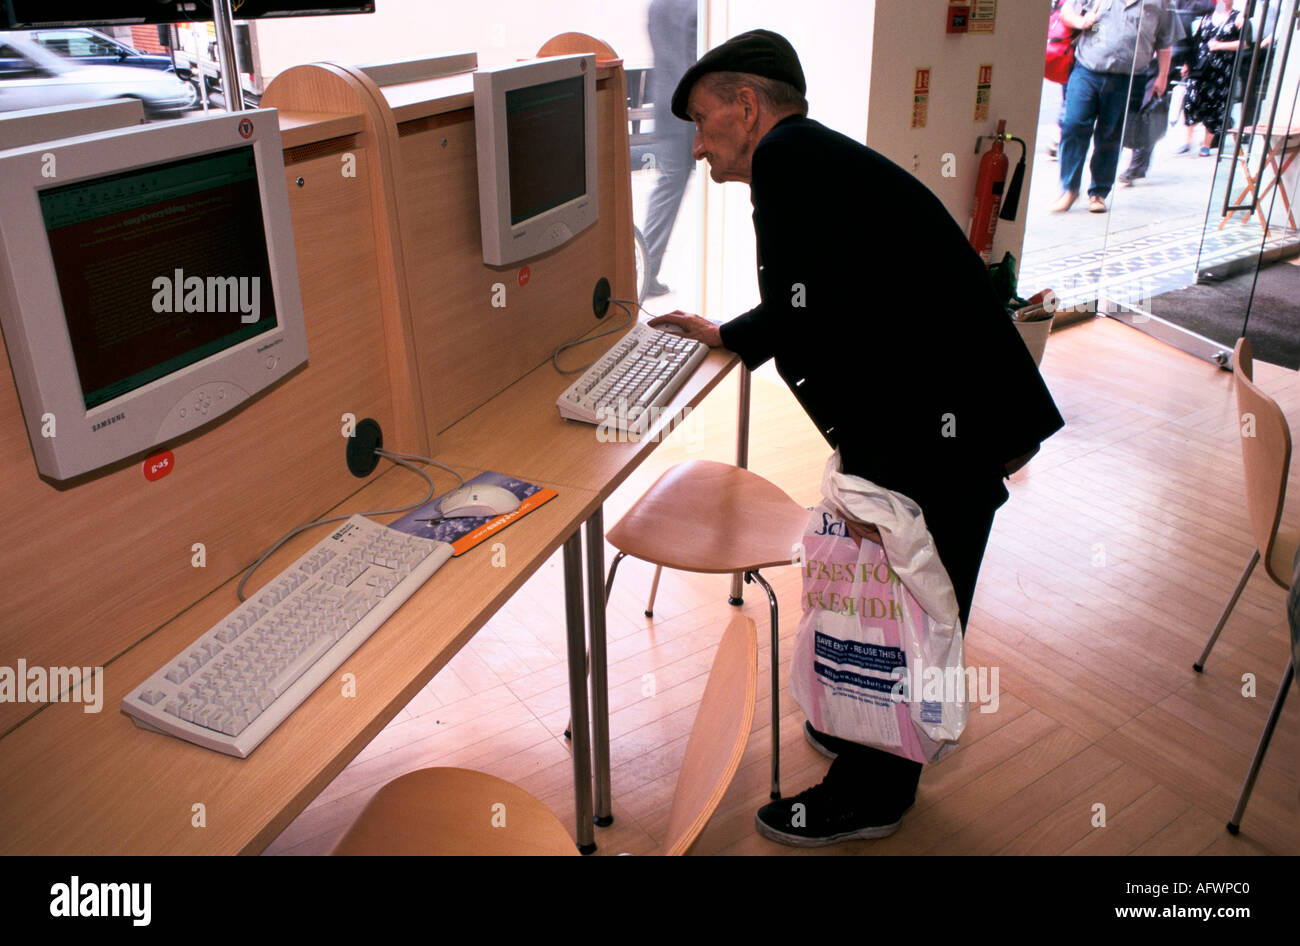 Internet cafe London UK 1990s. Elderly man looking at a computer,  at the Easy Everything internet shop 1999 England. HOMER SYKES Stock Photo